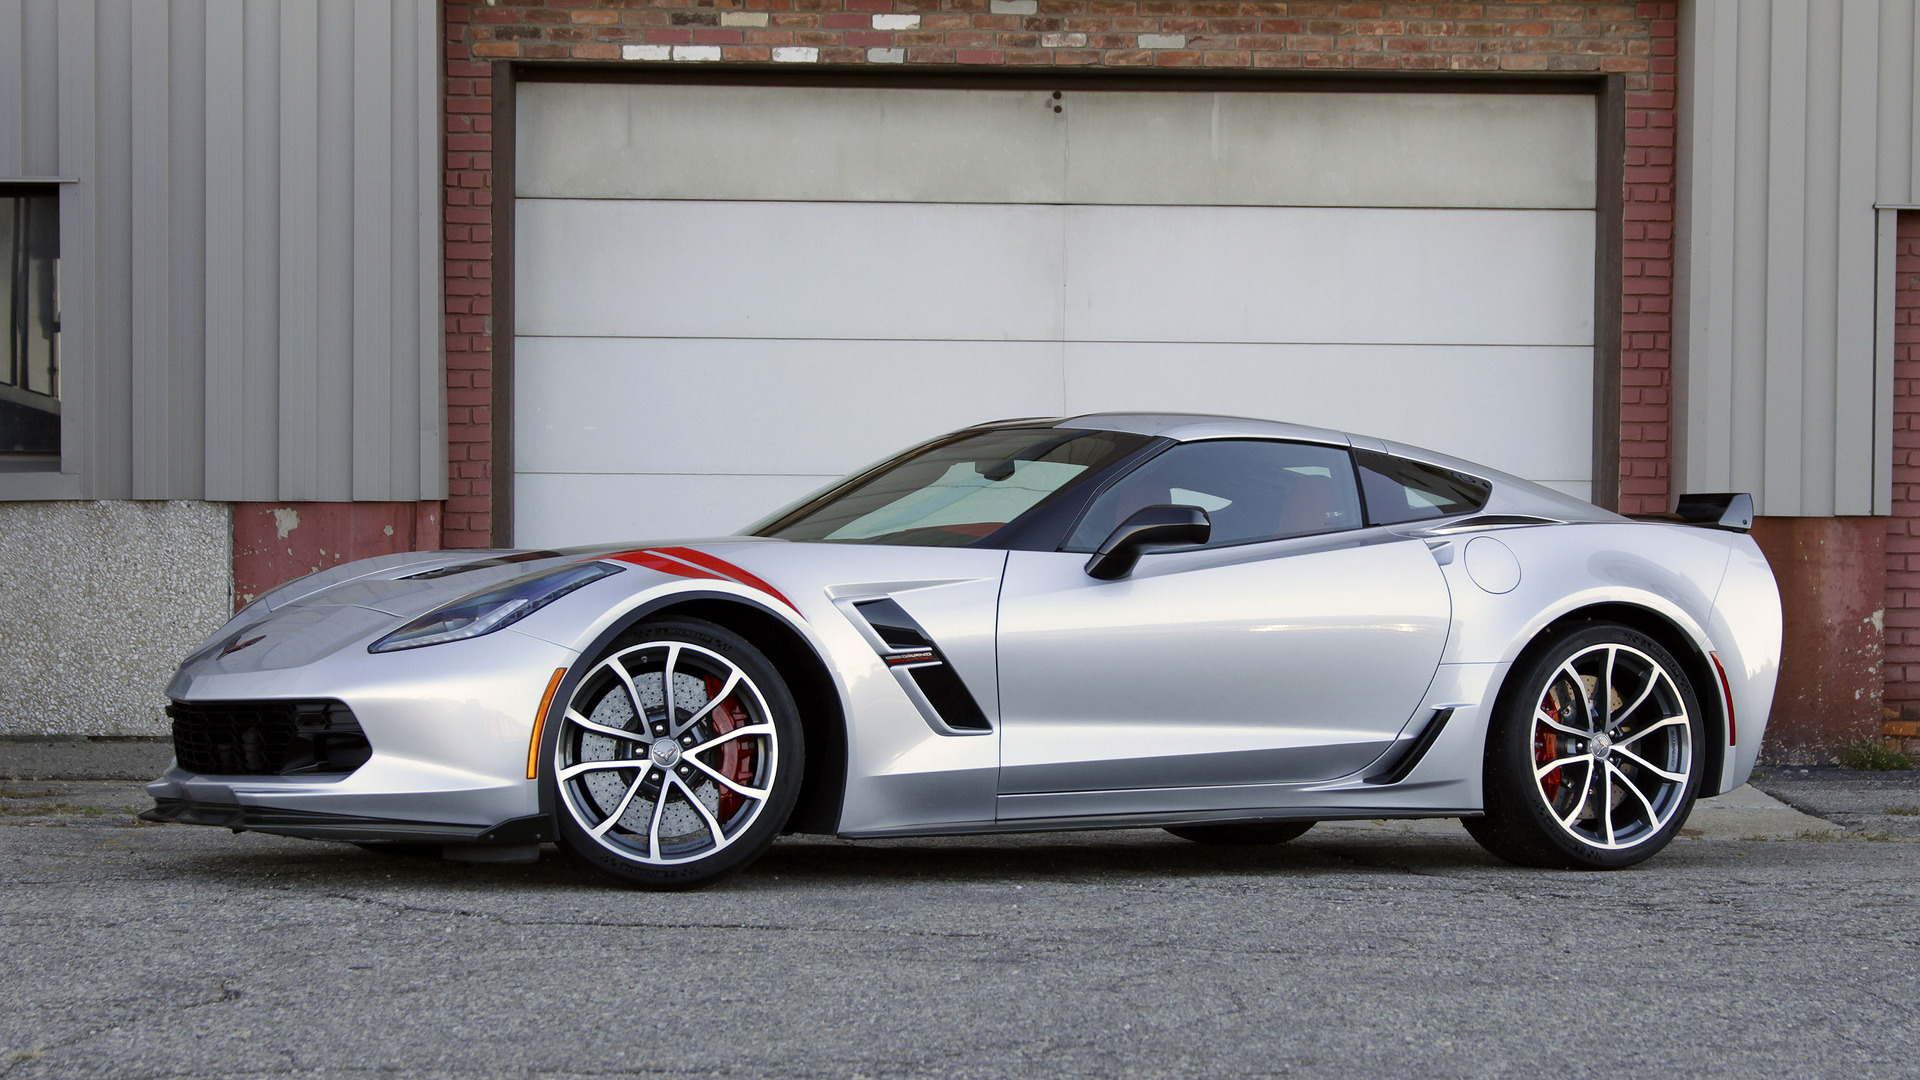 2017 Chevy Corvette Grand Sport Review: Daily driver for demons